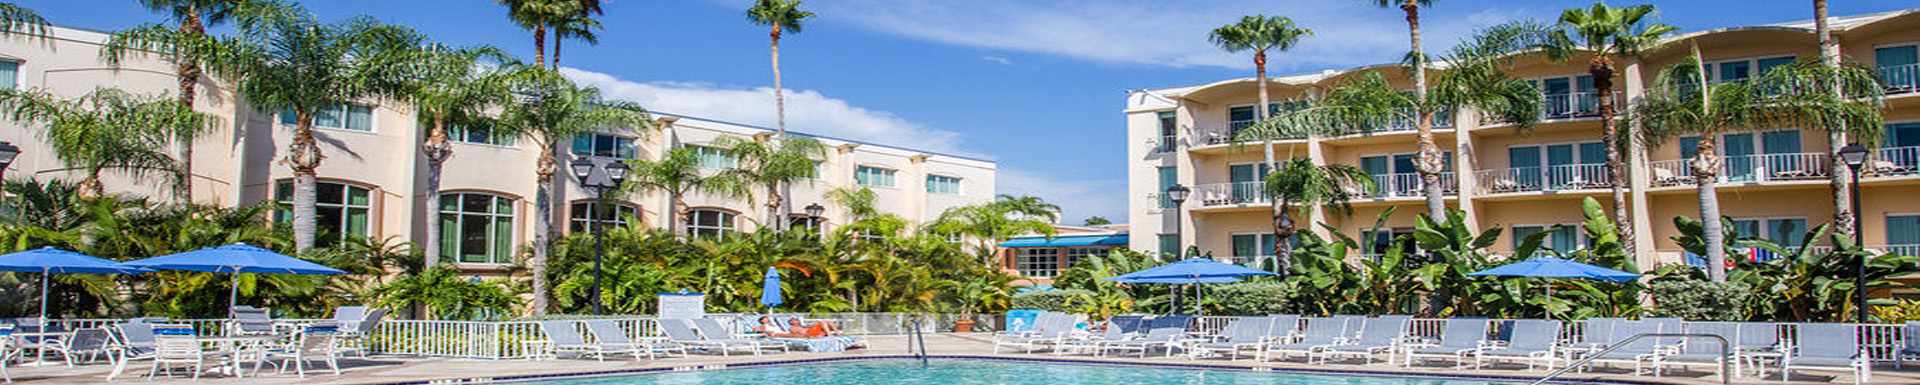 Safety Harbor All-Inclusive Resort and Spa